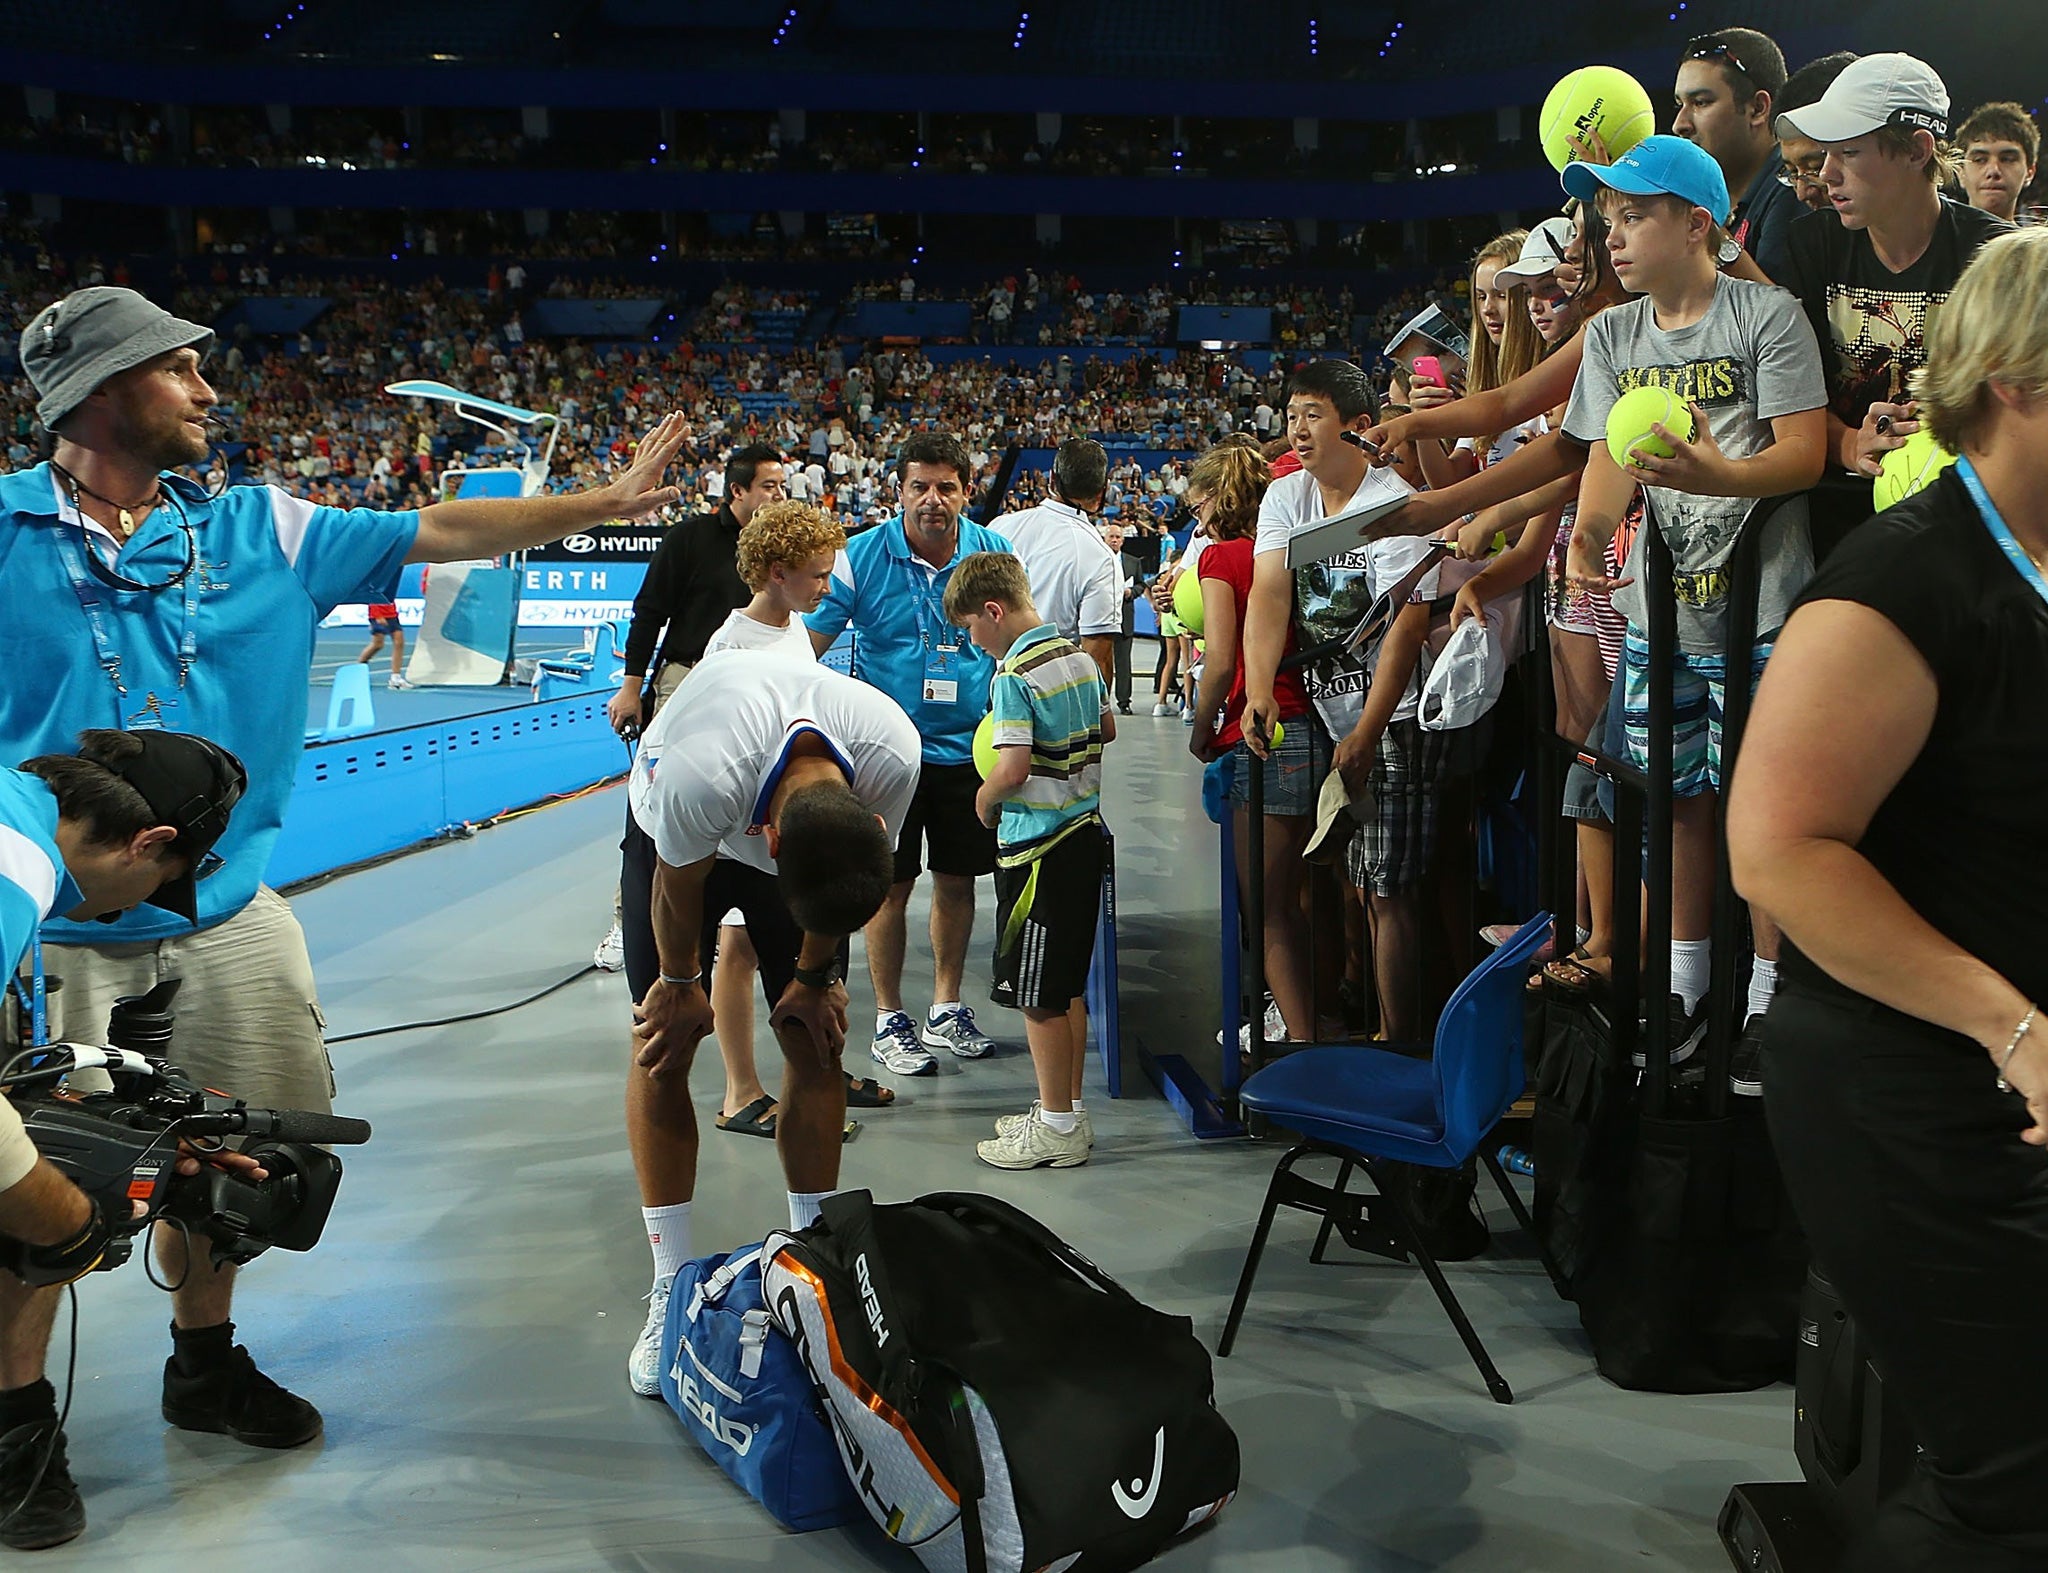 A group of young tennis enthusiasts injured Novak Djokovic as he was signing autographs at the Hopman Cup in Perth